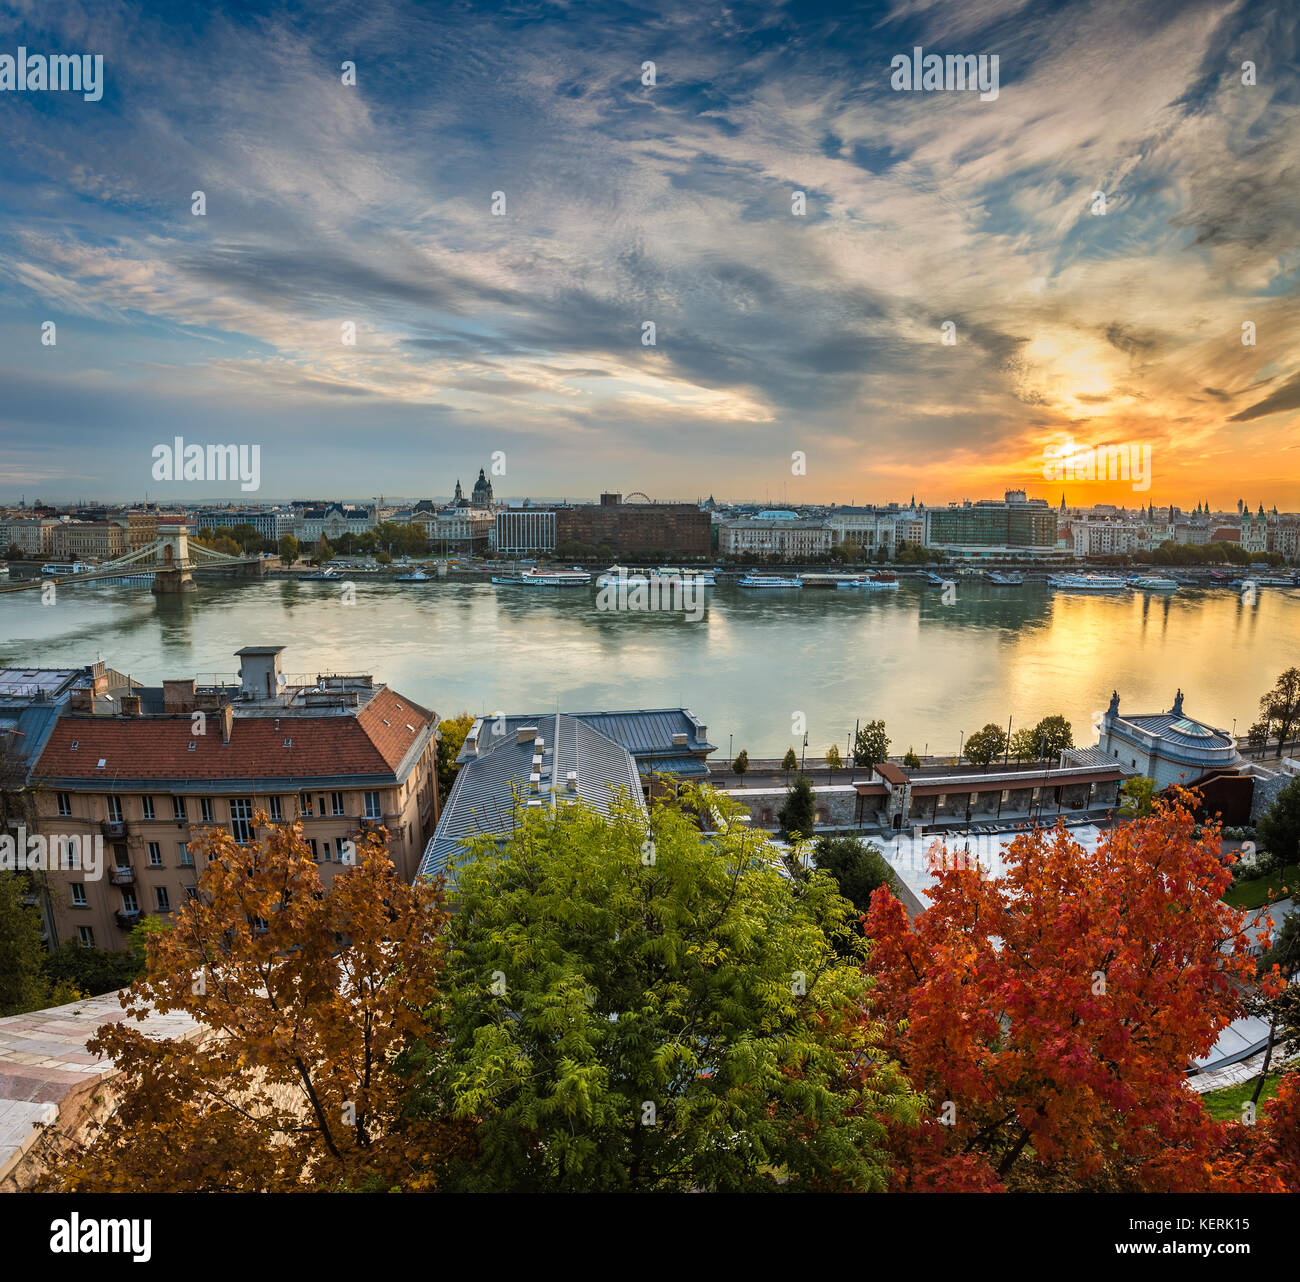 Budapest, Hungary - Autumn colors at the heart of Budapest at sunrise with Szechenyi Chain Bridge and other landmarks Stock Photo